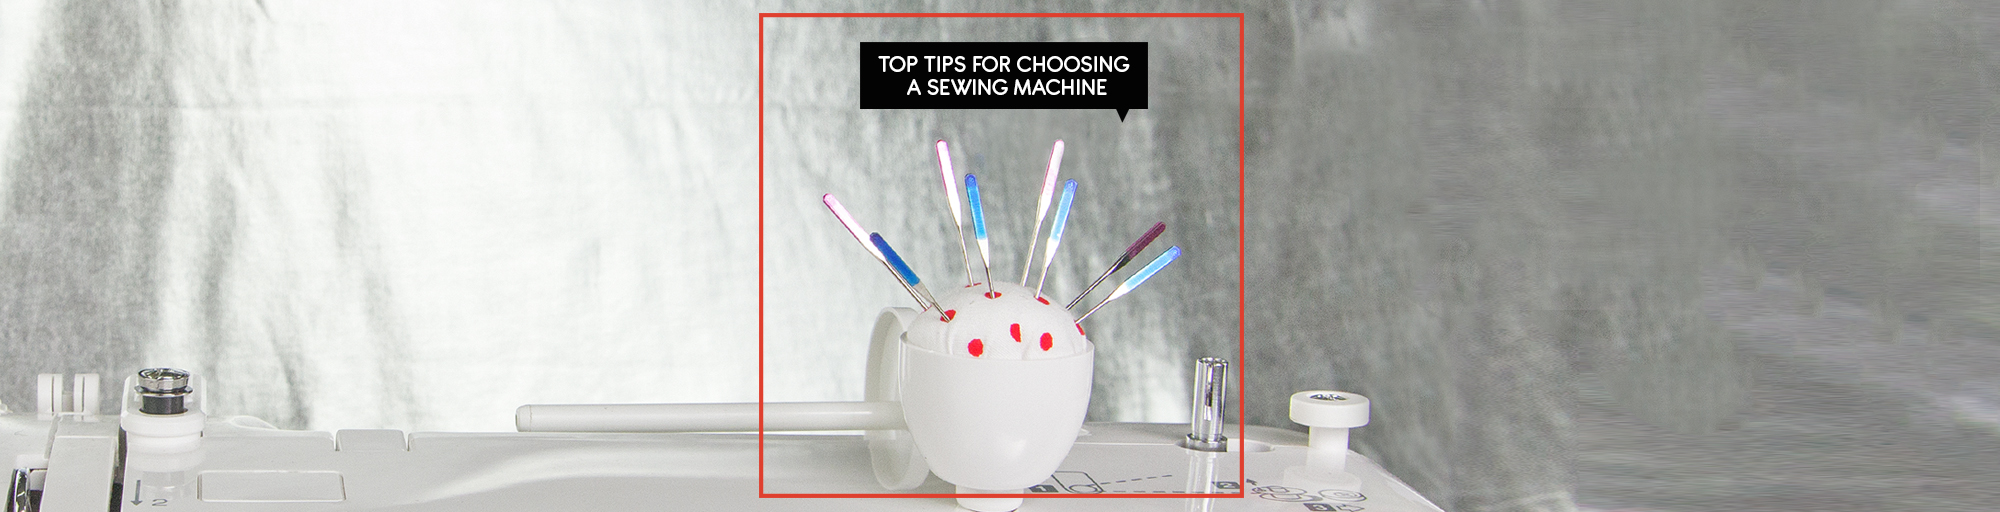 top tips for choosing sewing machine blog banner